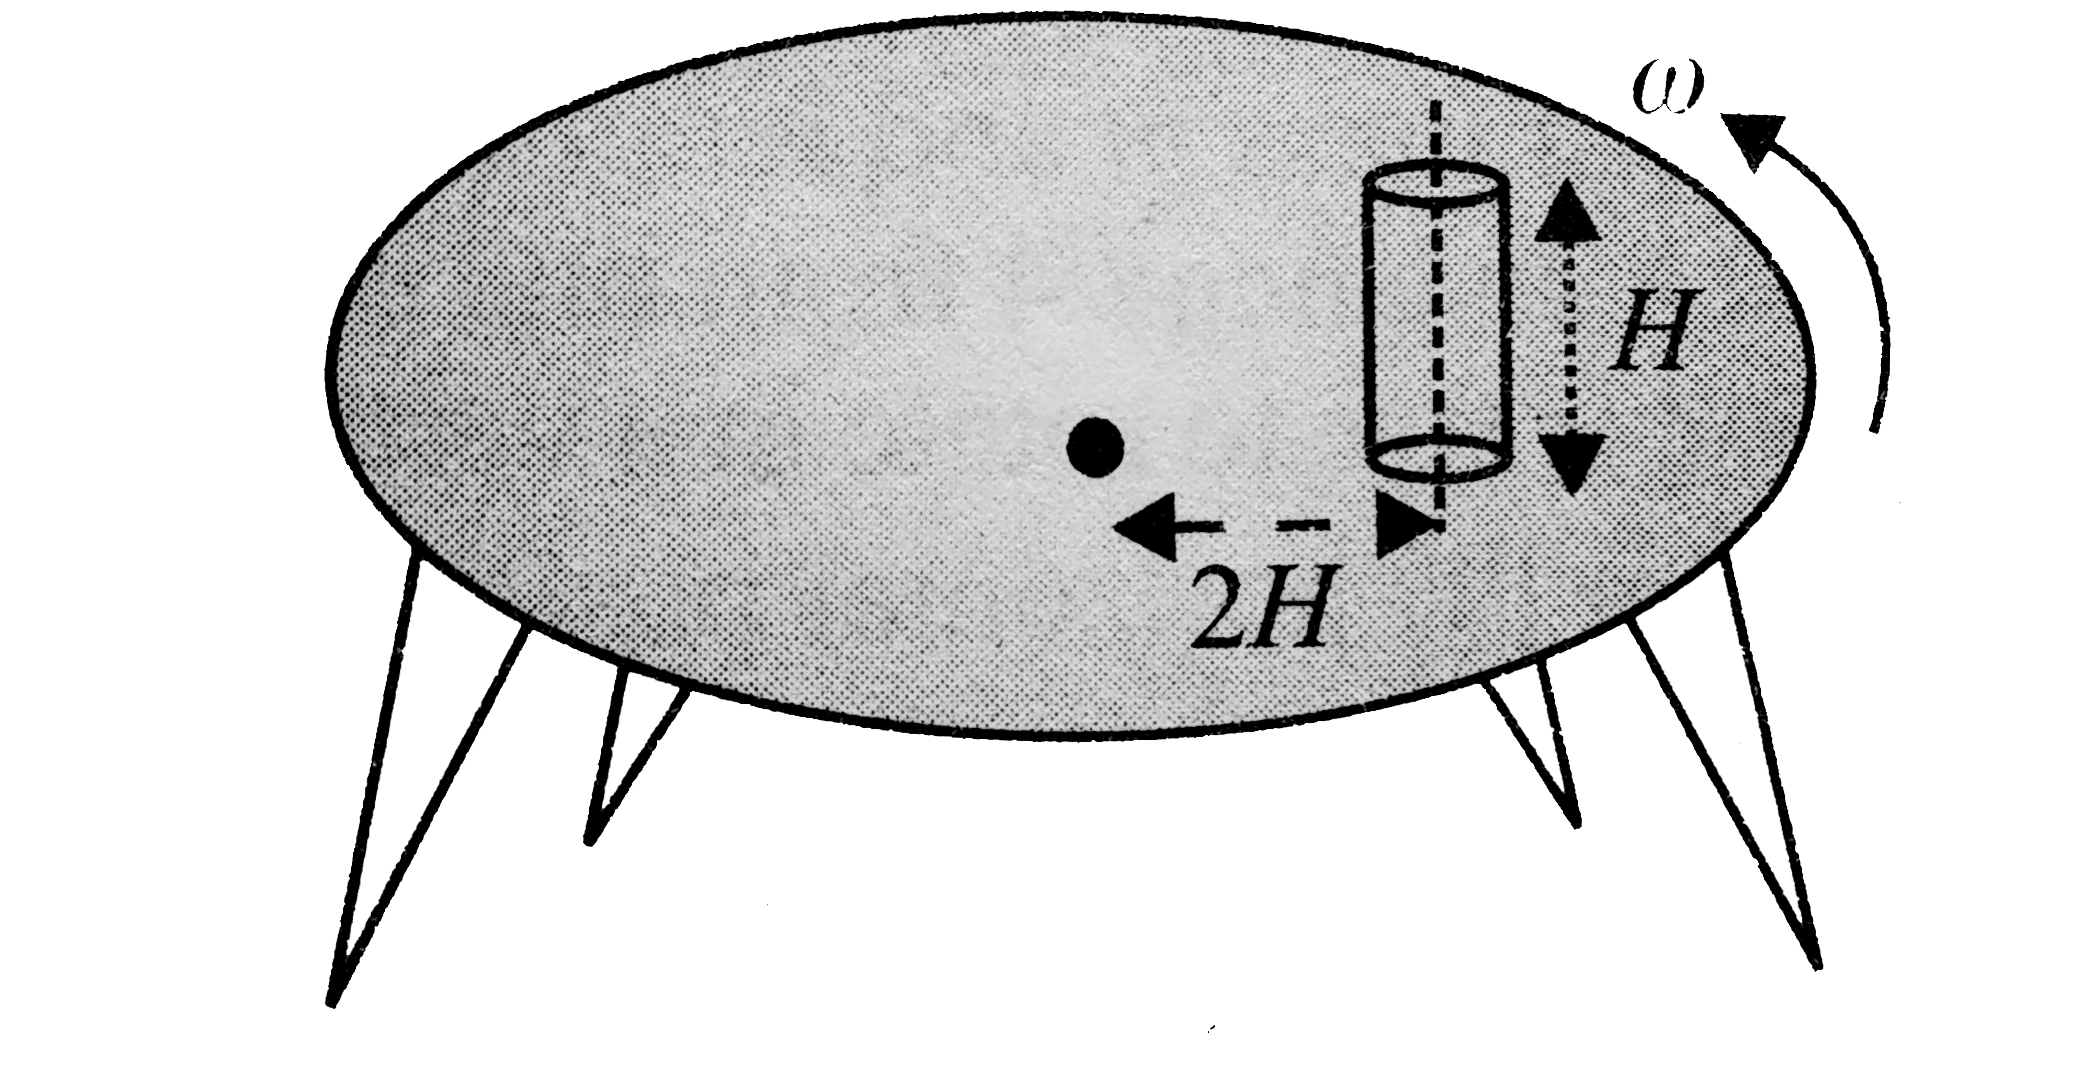 A cylinder of height H and diameter H//4 is kept on a frictional turntable as shown in Fig. The axis of the cylinder is perpendicular to the surface of the table and the distance of axis of the cylinder is 2H from the centre of the table. The angular speed of the turntable at which the cylinder will start toppling (assume that friction is sufficient to prevent slipping) is